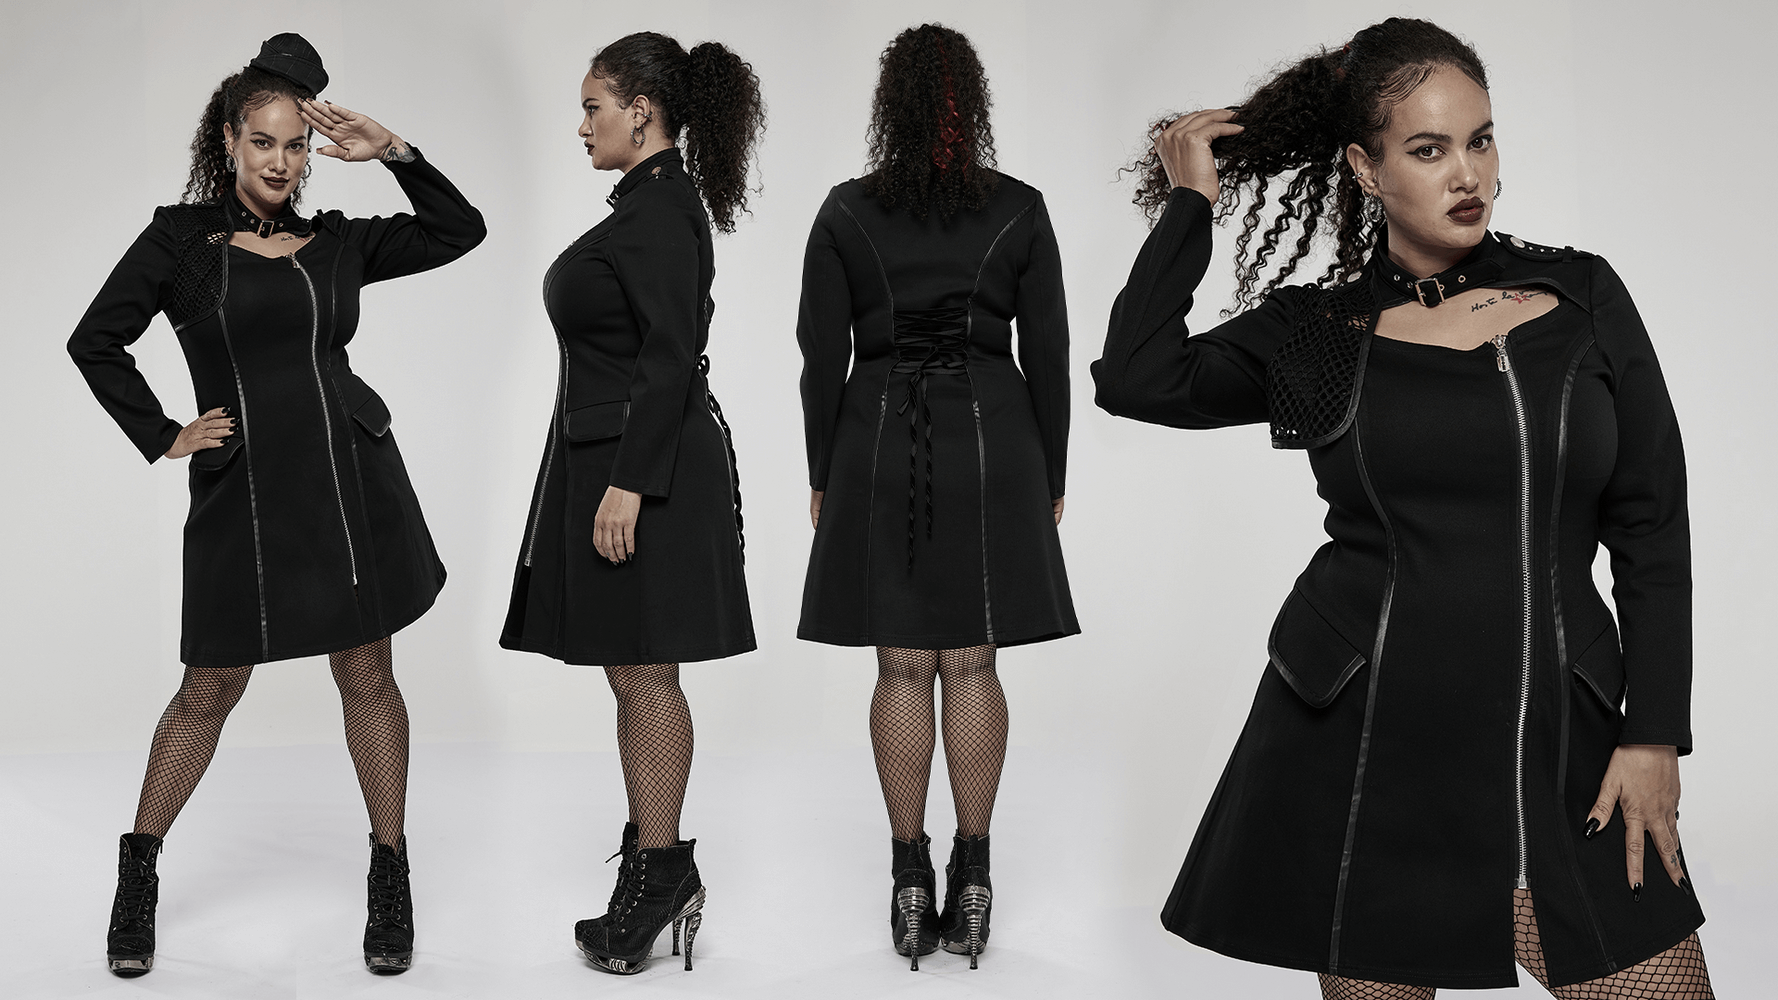 Chic Punk Zip-Front Dress with Gauze Detail and Pockets - HARD'N'HEAVY